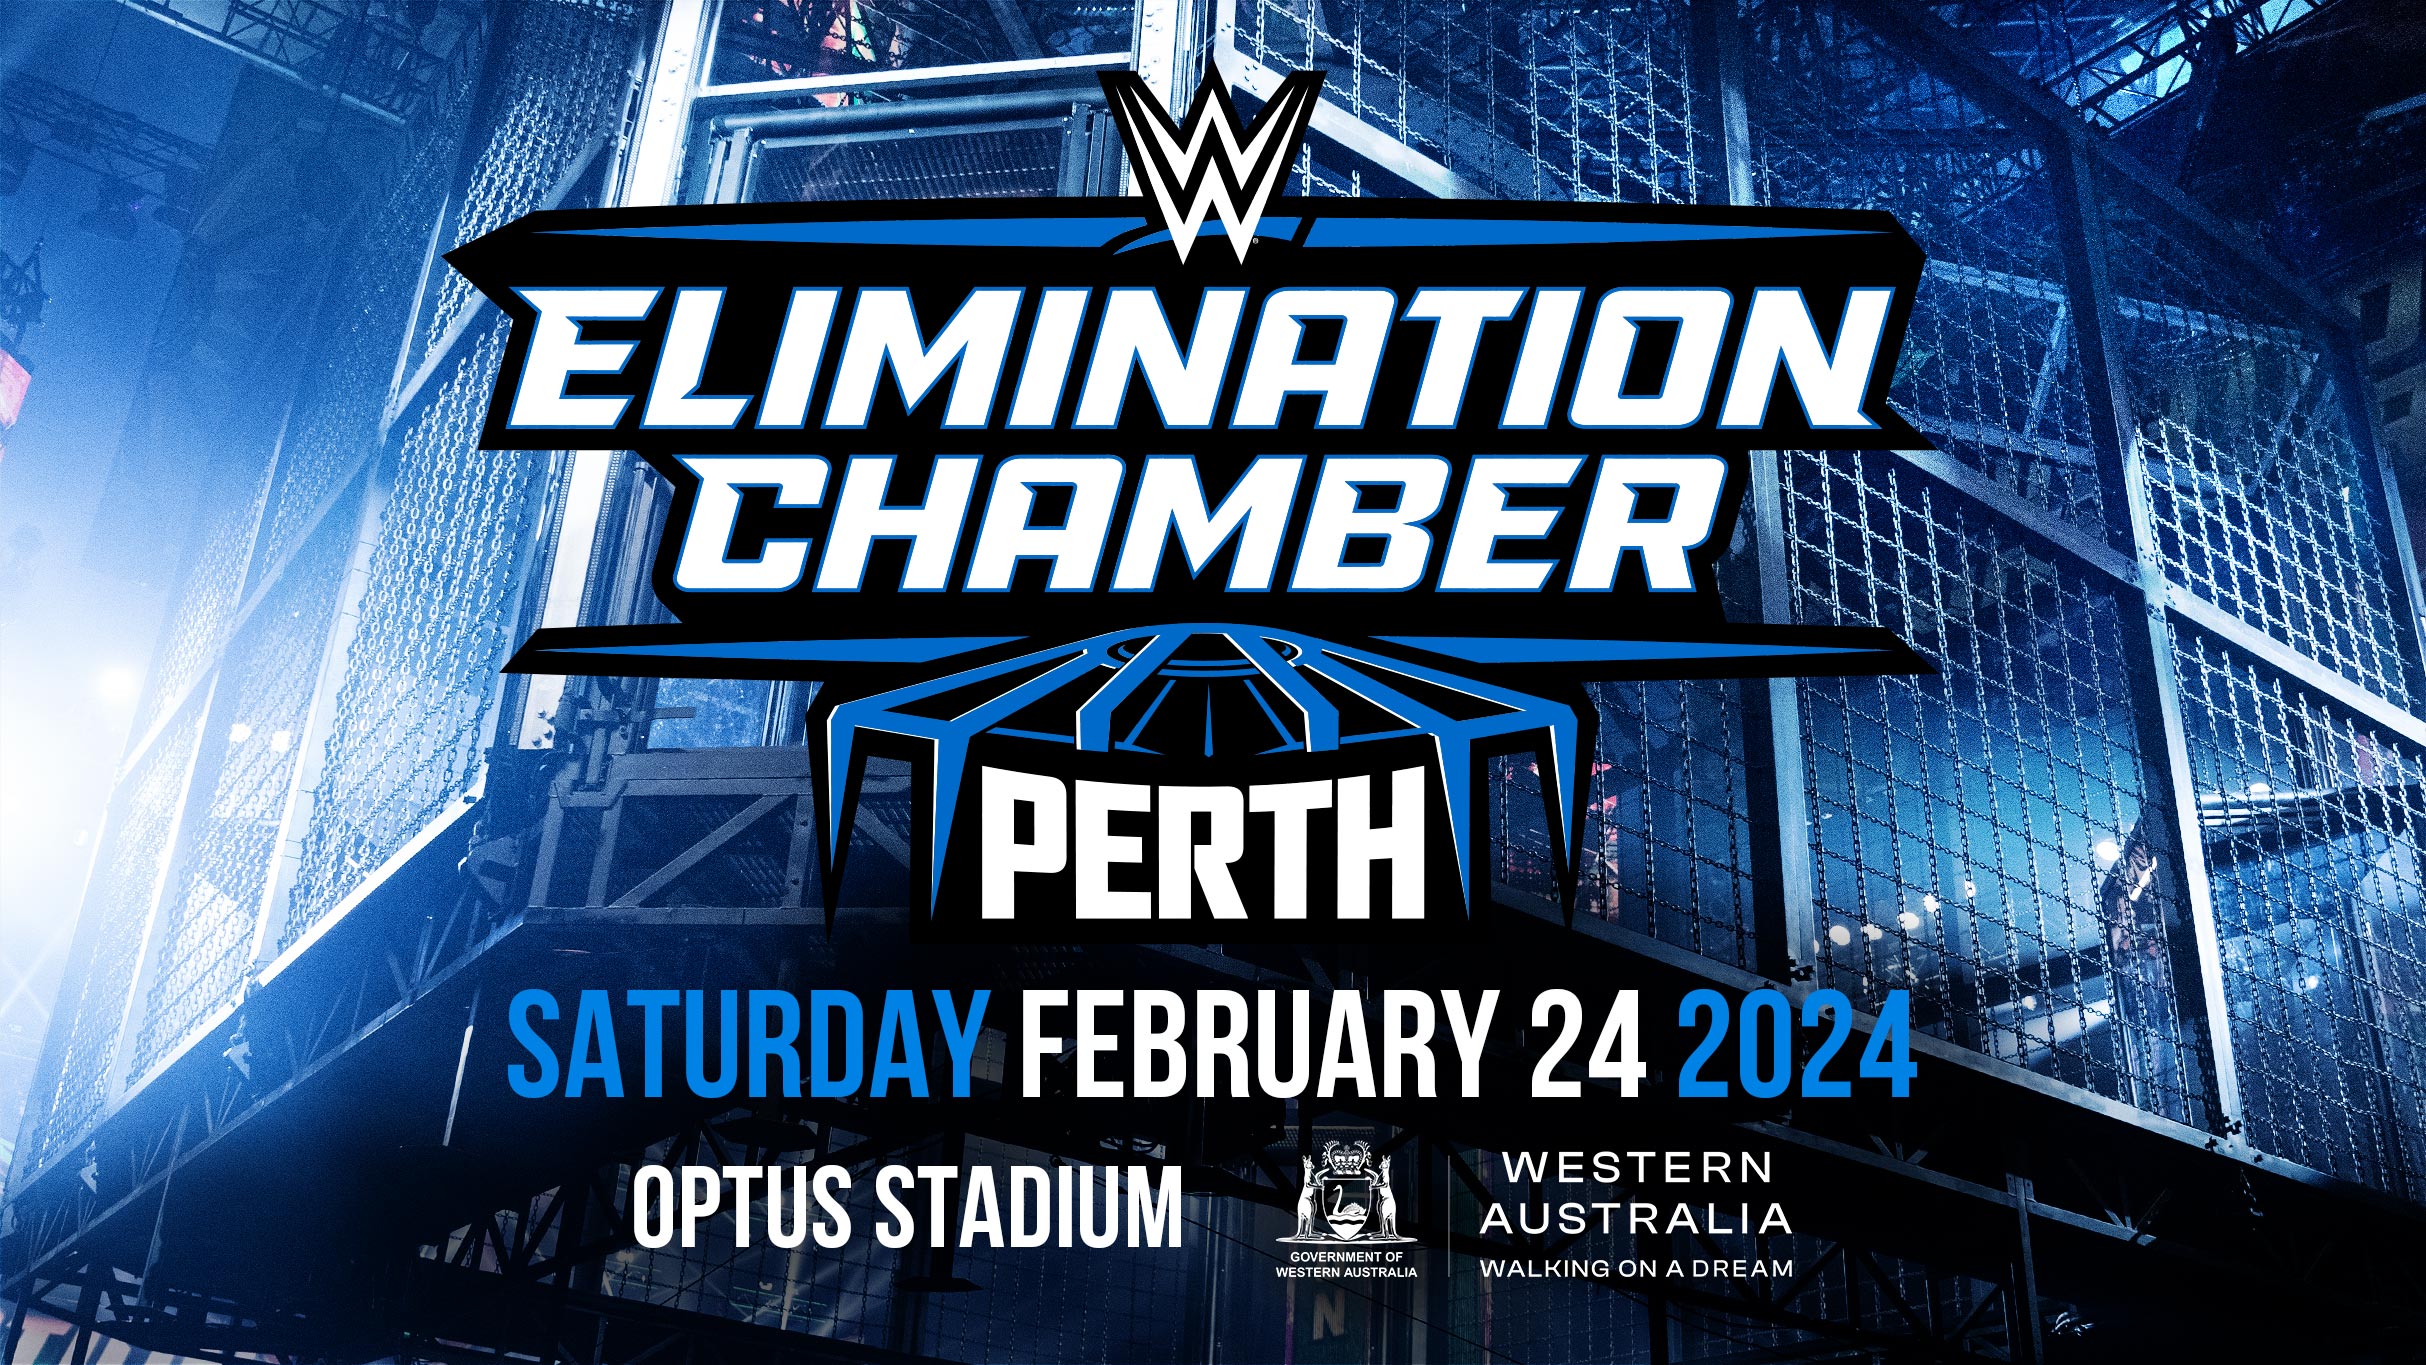 WWE: ELIMINATION CHAMBER PERTH presale code for approved tickets in Burswood